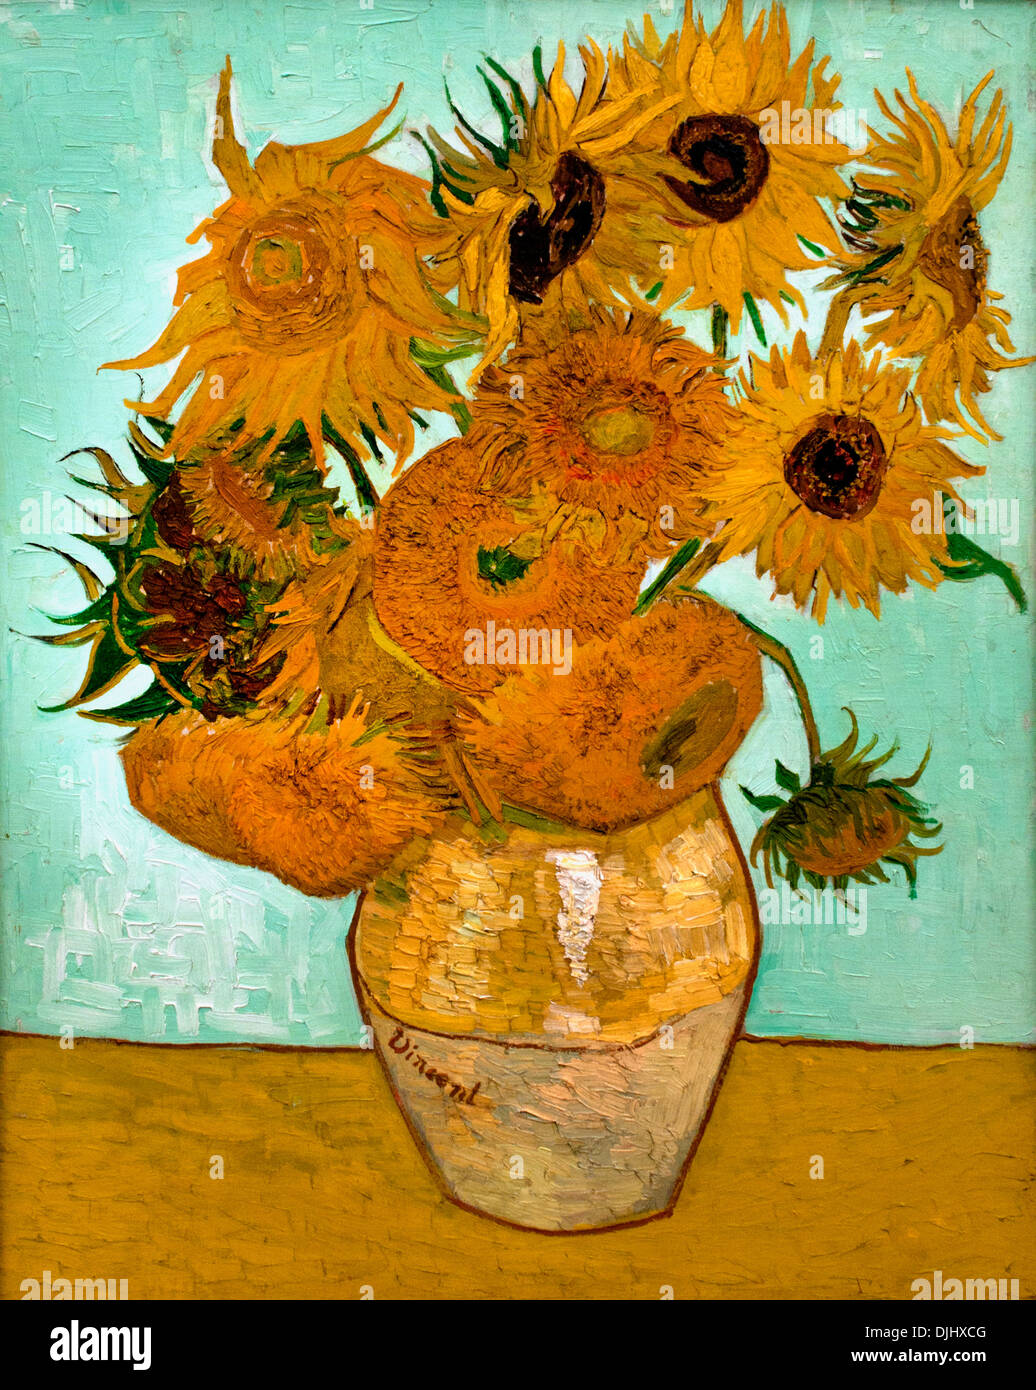 Vincent Van Gogh Sunflowers Doctor Who